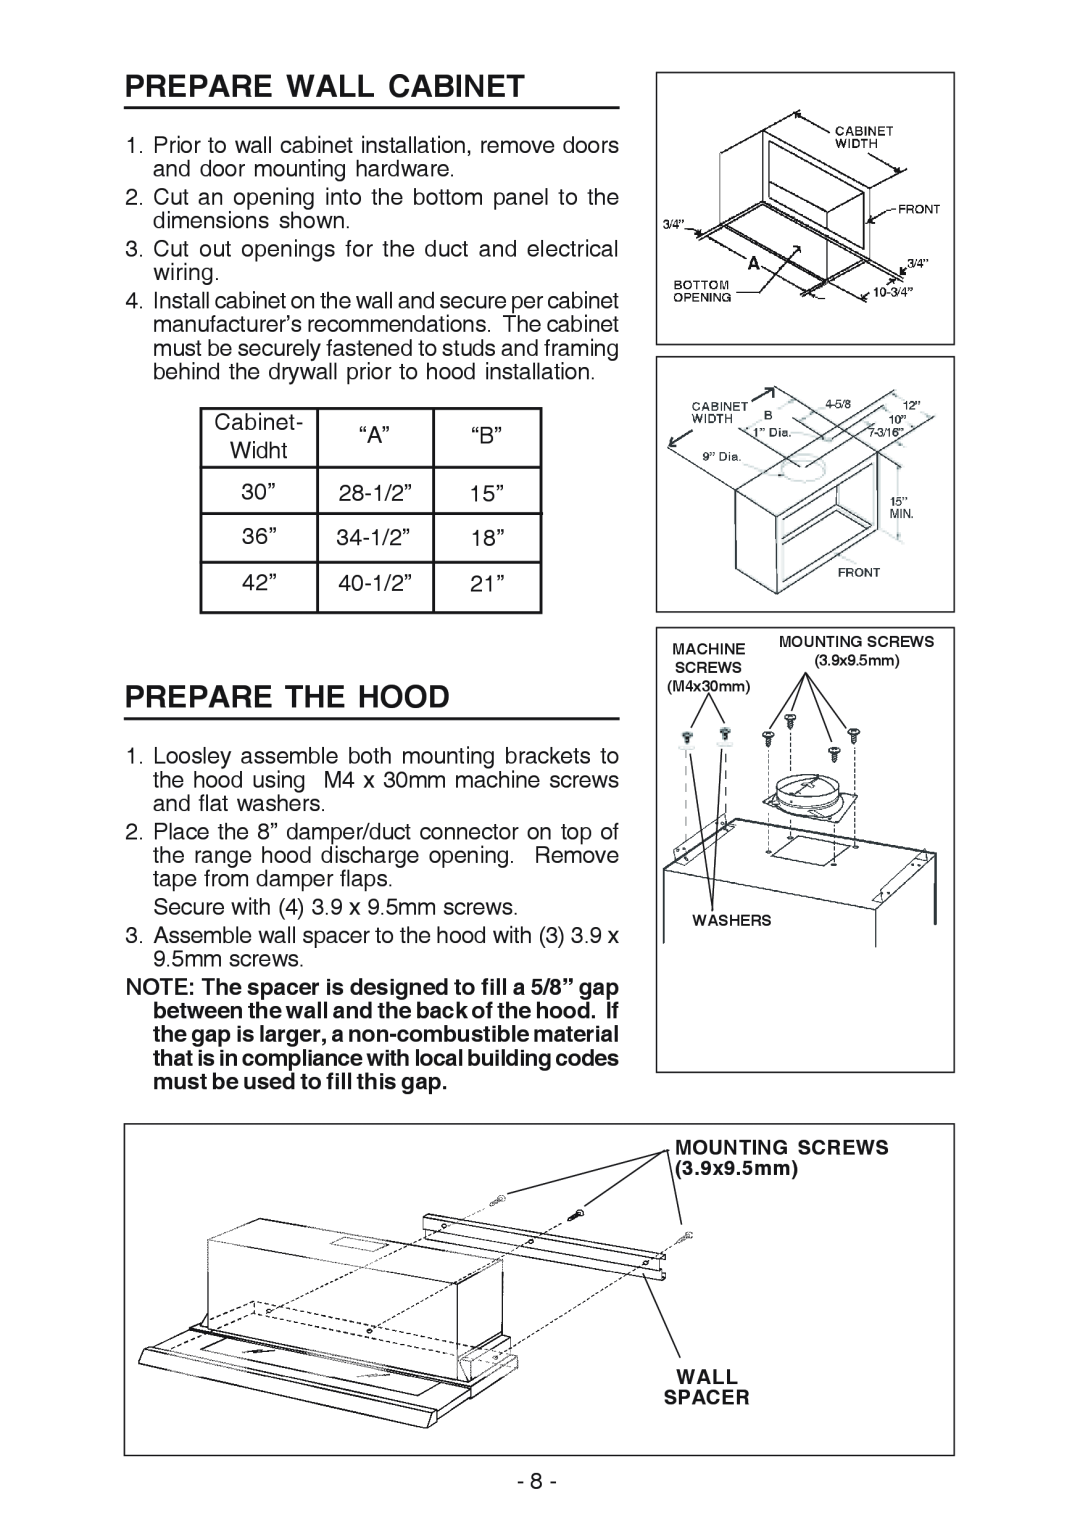 Best U102E manual Prepare Wall Cabinet, Prepare The Hood, Cut an opening into the bottom panel to the dimensions shown 